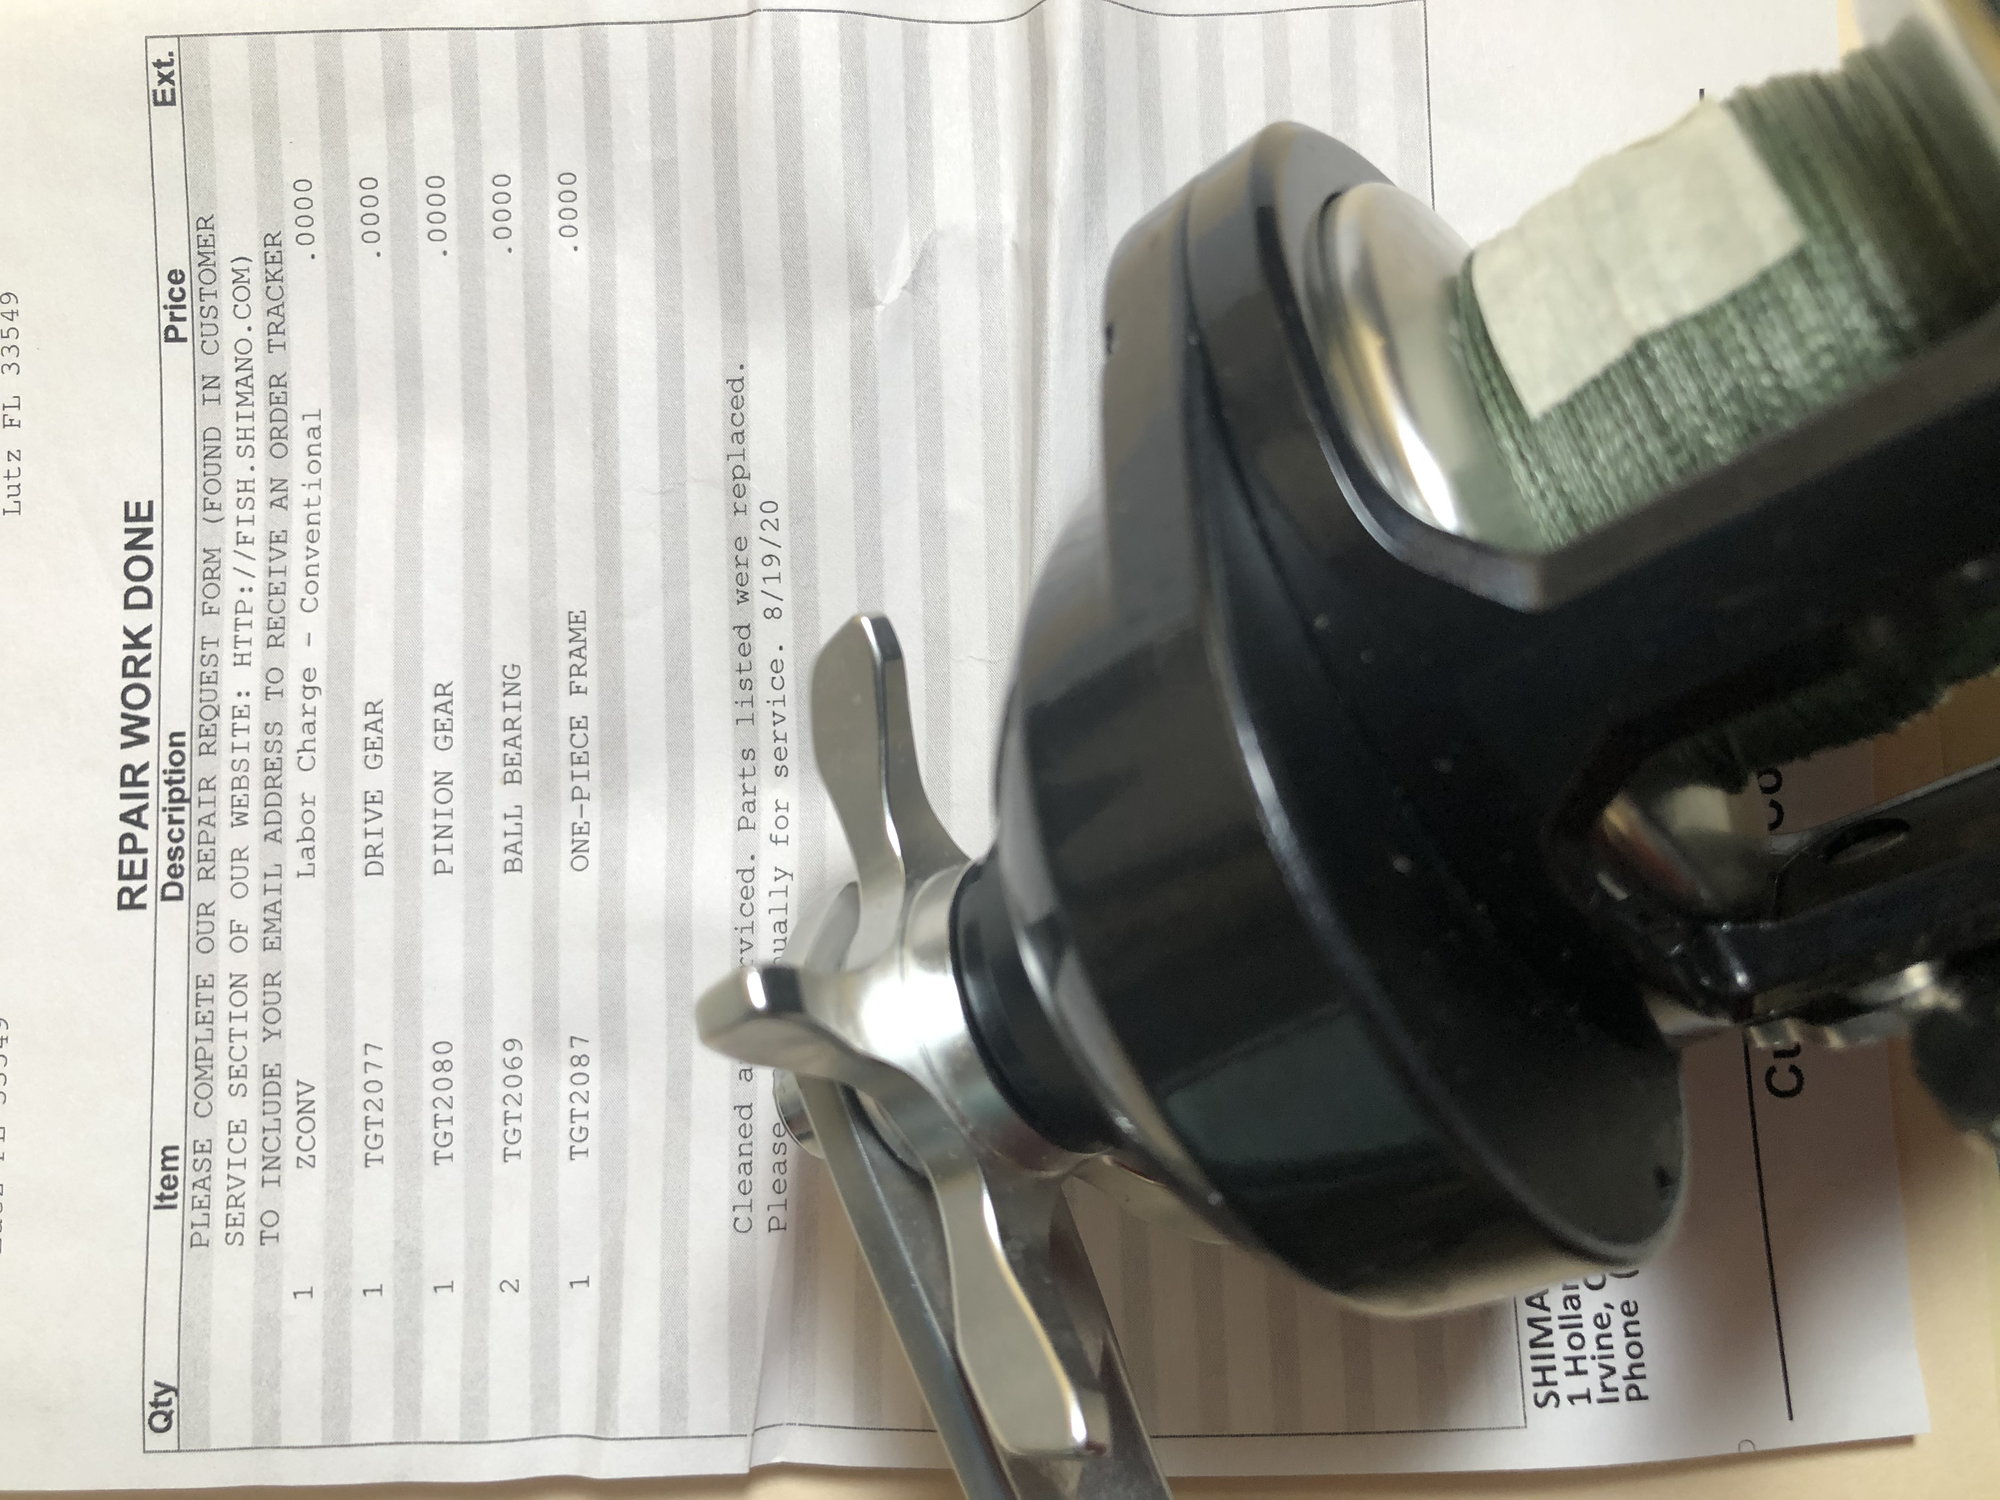 shimano torium 30 hg - a quick look inside - The Hull Truth - Boating and  Fishing Forum